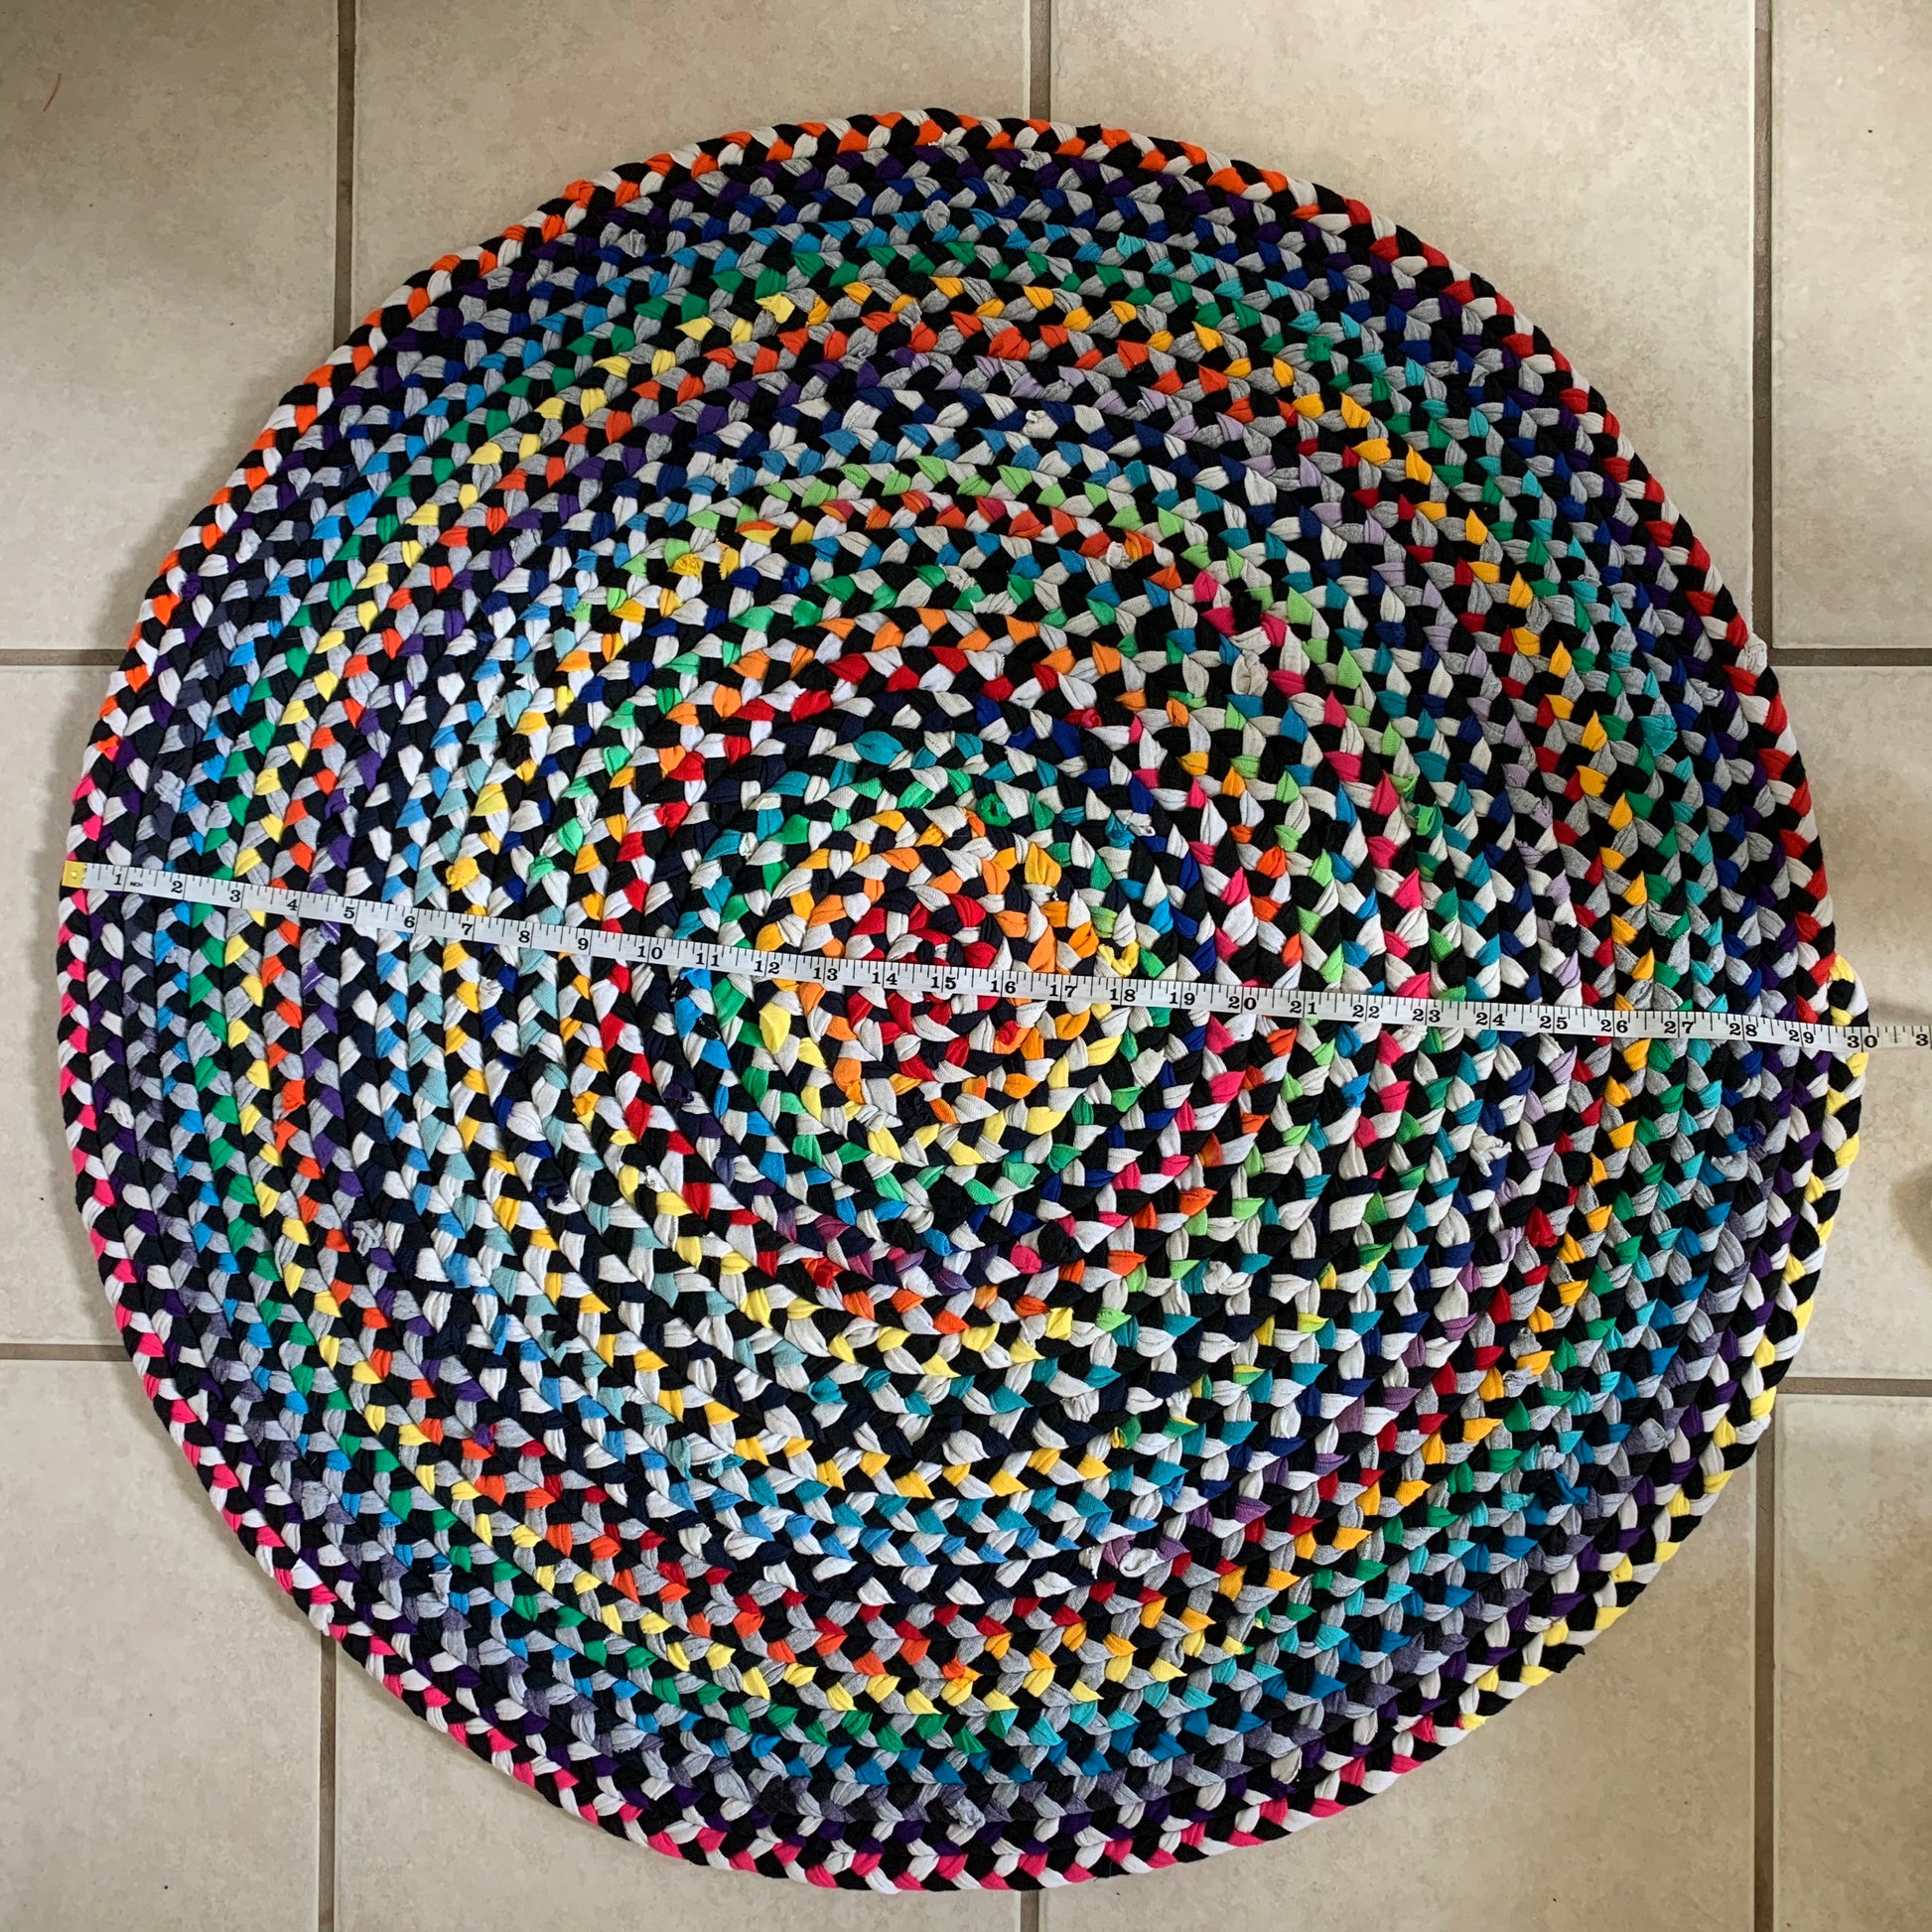 Aerial view, of the top of the rug. There is a measuring tape across the front of the rug, and the tape reads 30 inches as the diameter